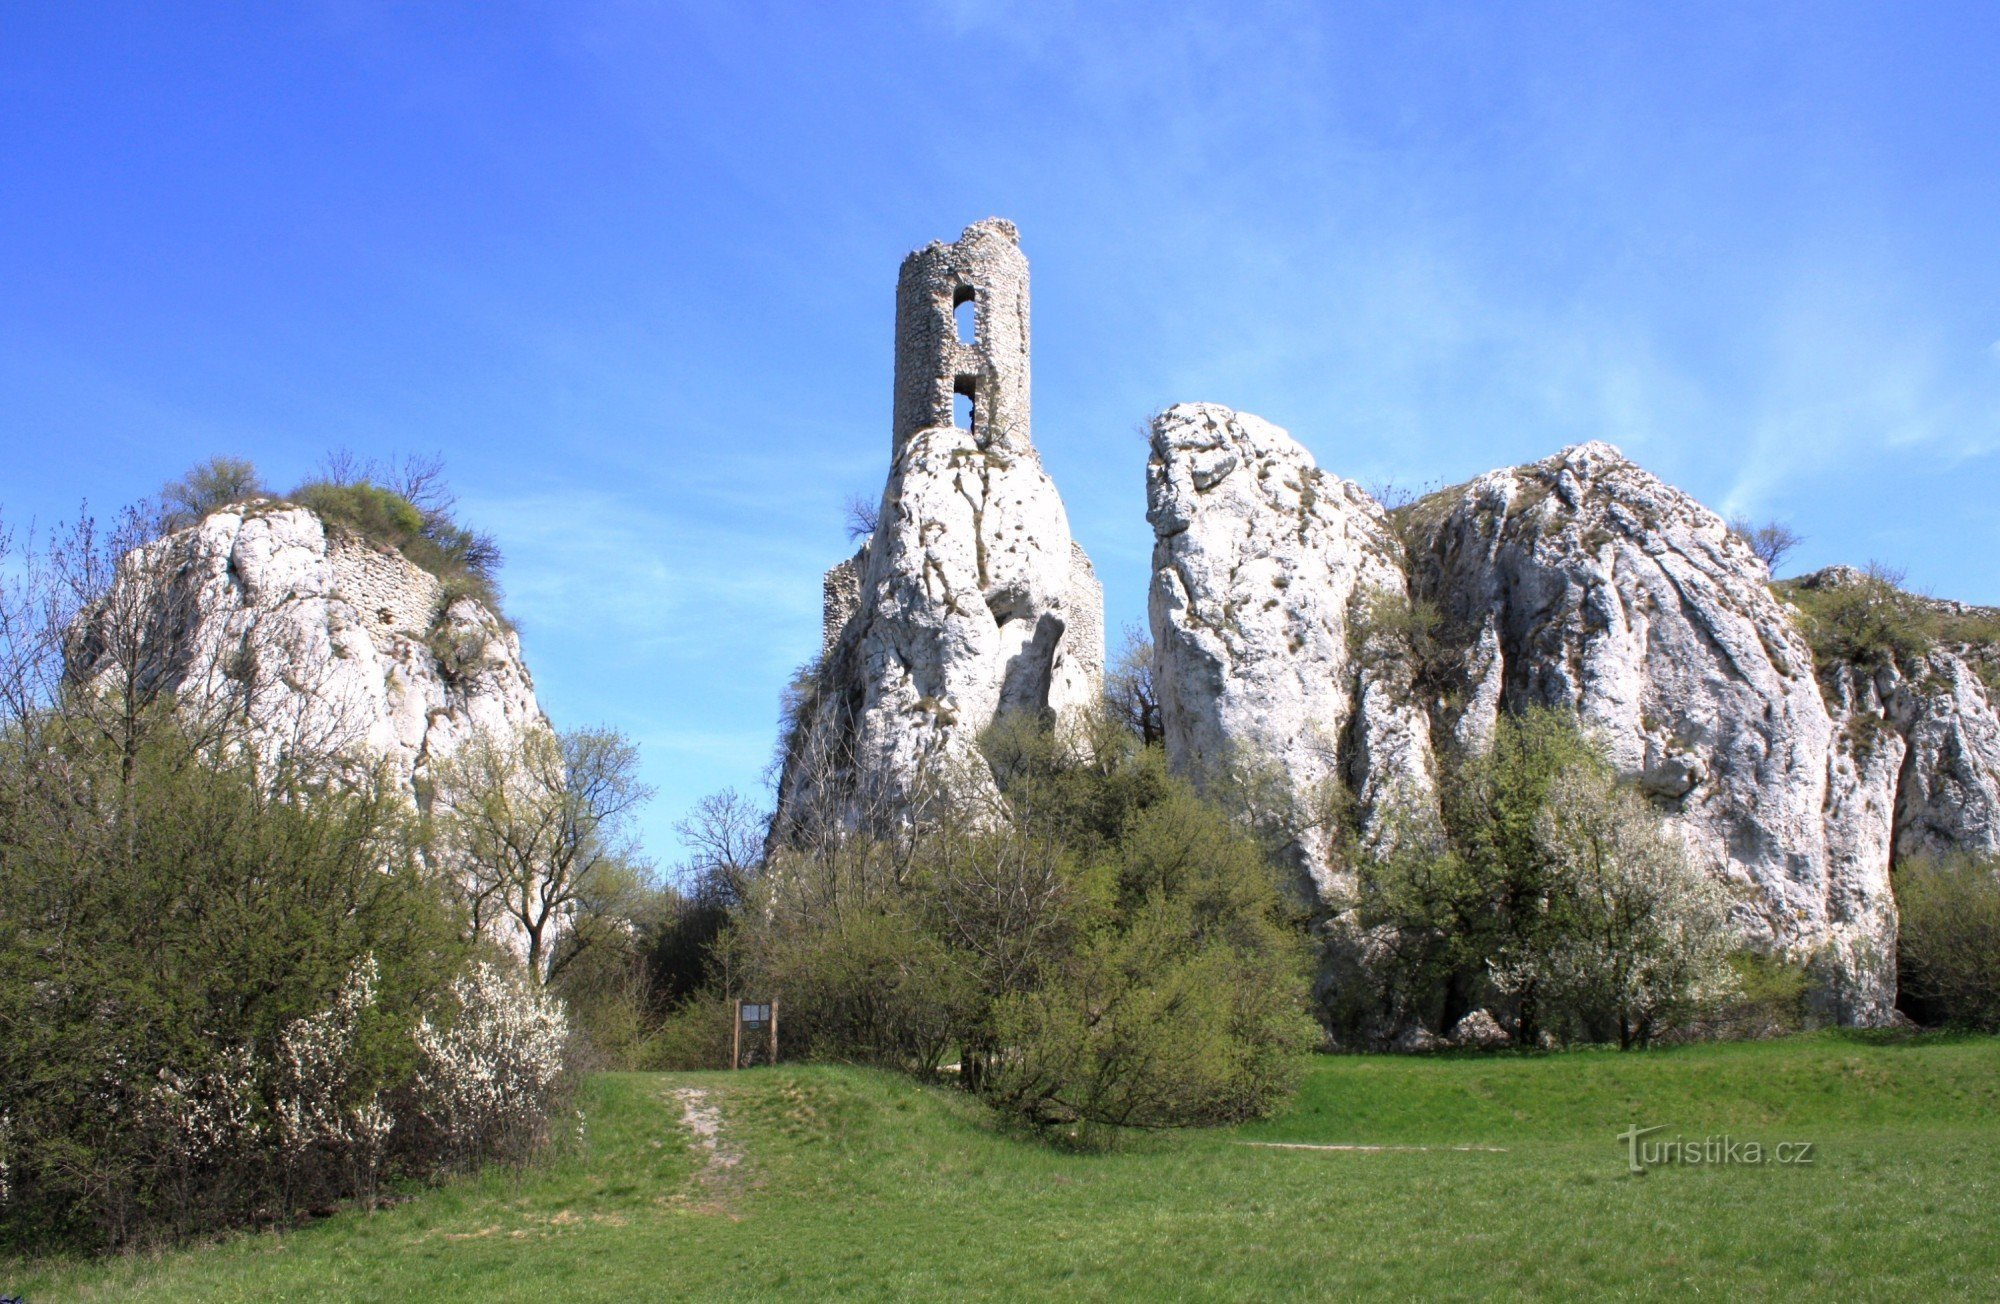 General view of the rock towers from the meadow